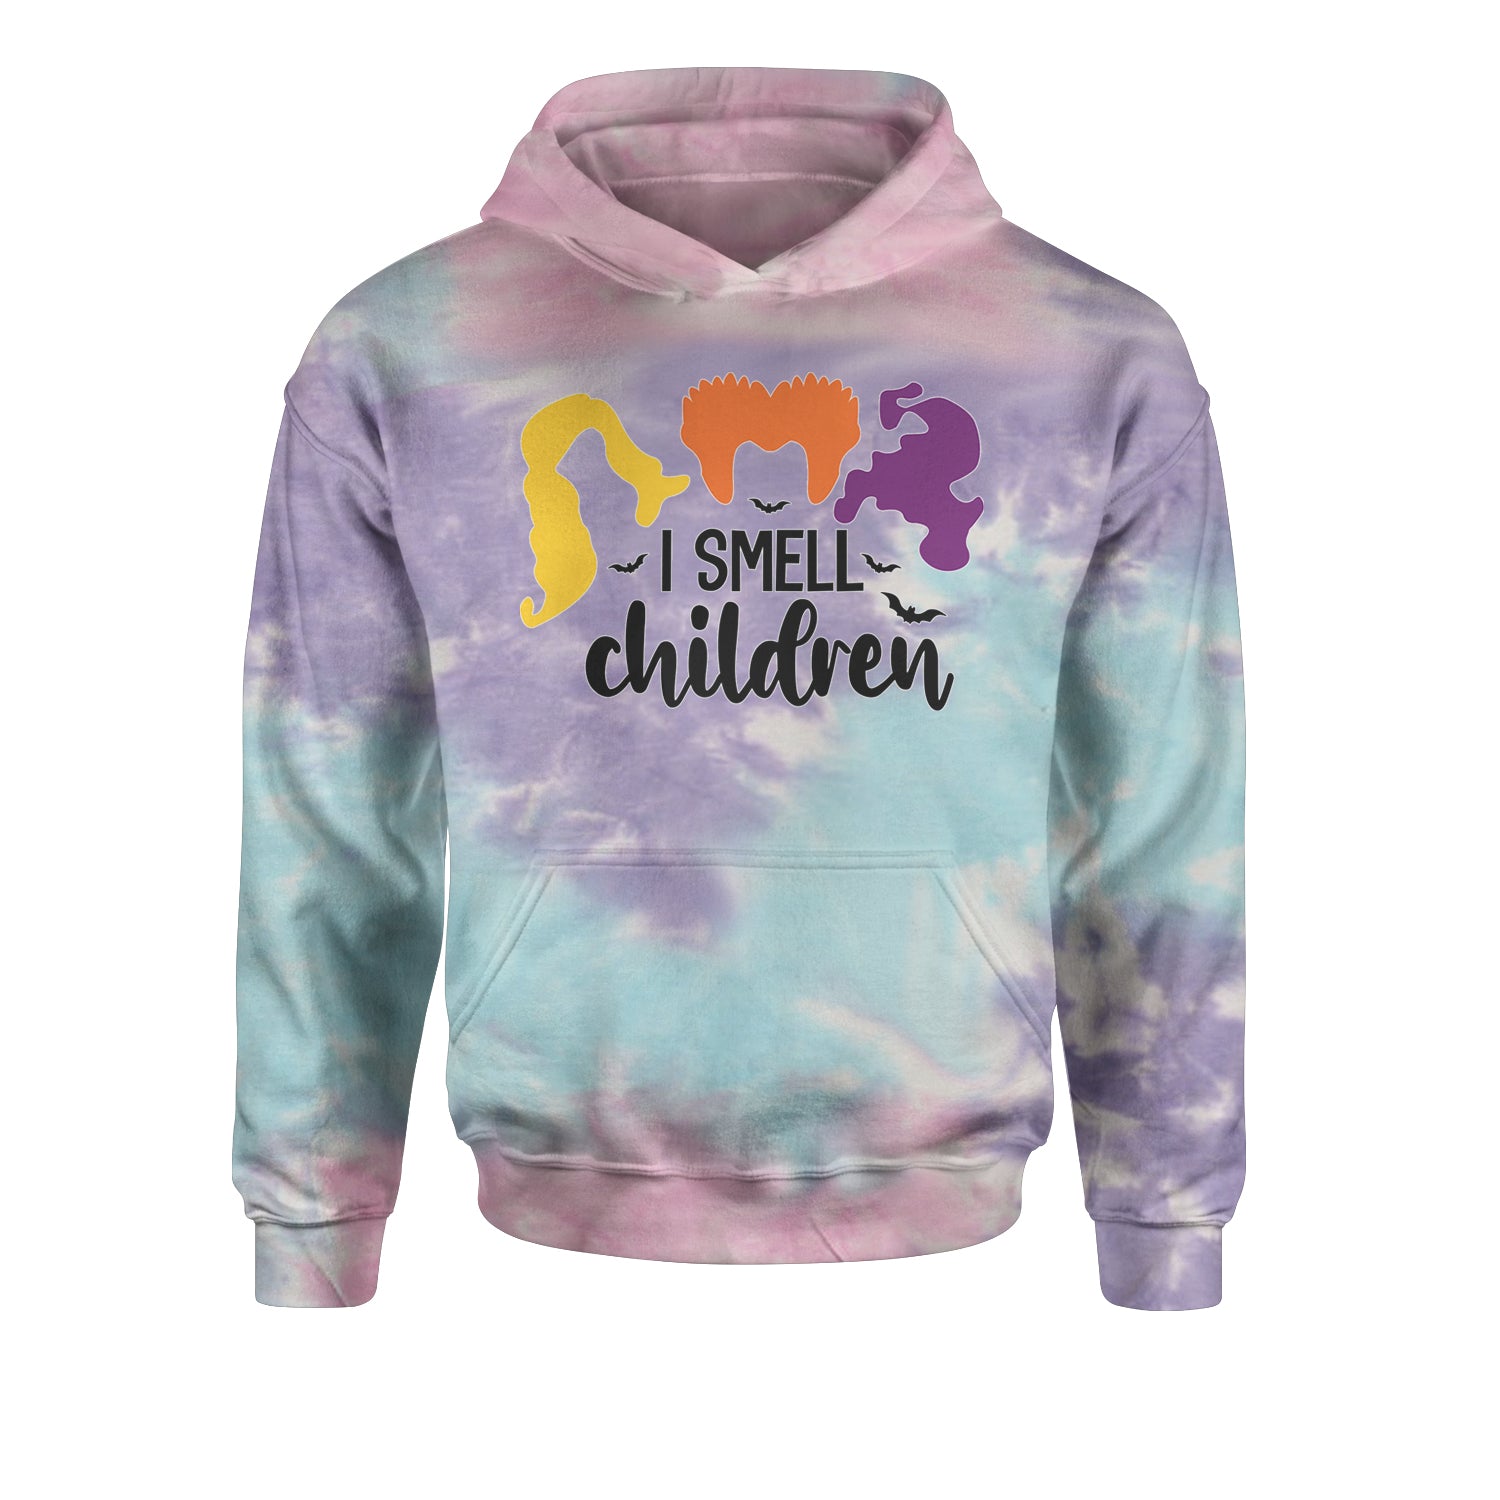 I Smell Children Hocus Pocus Youth-Sized Hoodie descendants, enchanted, eve, hallows, hocus, or, pocus, sanderson, sisters, treat, trick, witches by Expression Tees